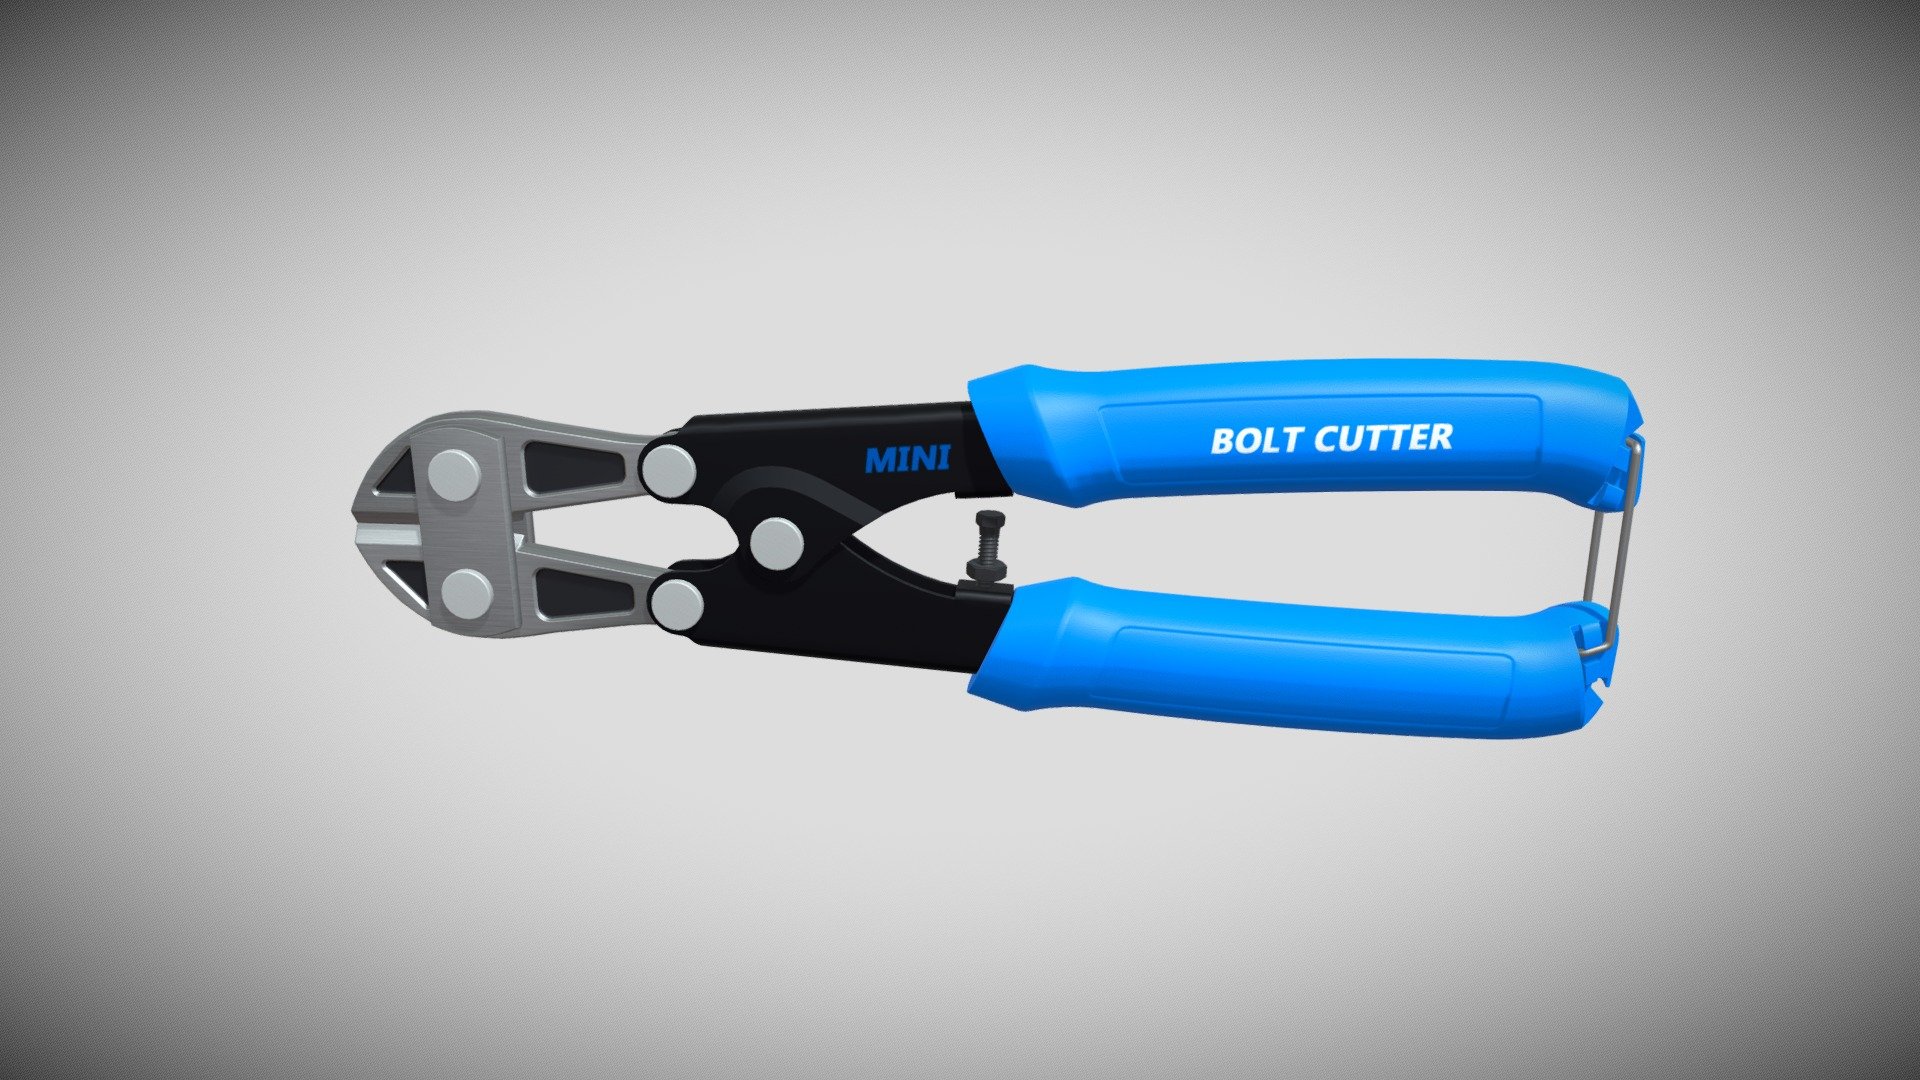 Detailed model of a Mini Bolt Cutter, modeled in Cinema 4D.The model was created using approximate real world dimensions.

The model has 20,110 polys and 20,253 vertices.

An additional file has been provided containing the original Cinema 4D project files with both standard and v-ray materials, textures and other 3d export files such as 3ds, fbx and obj 3d model